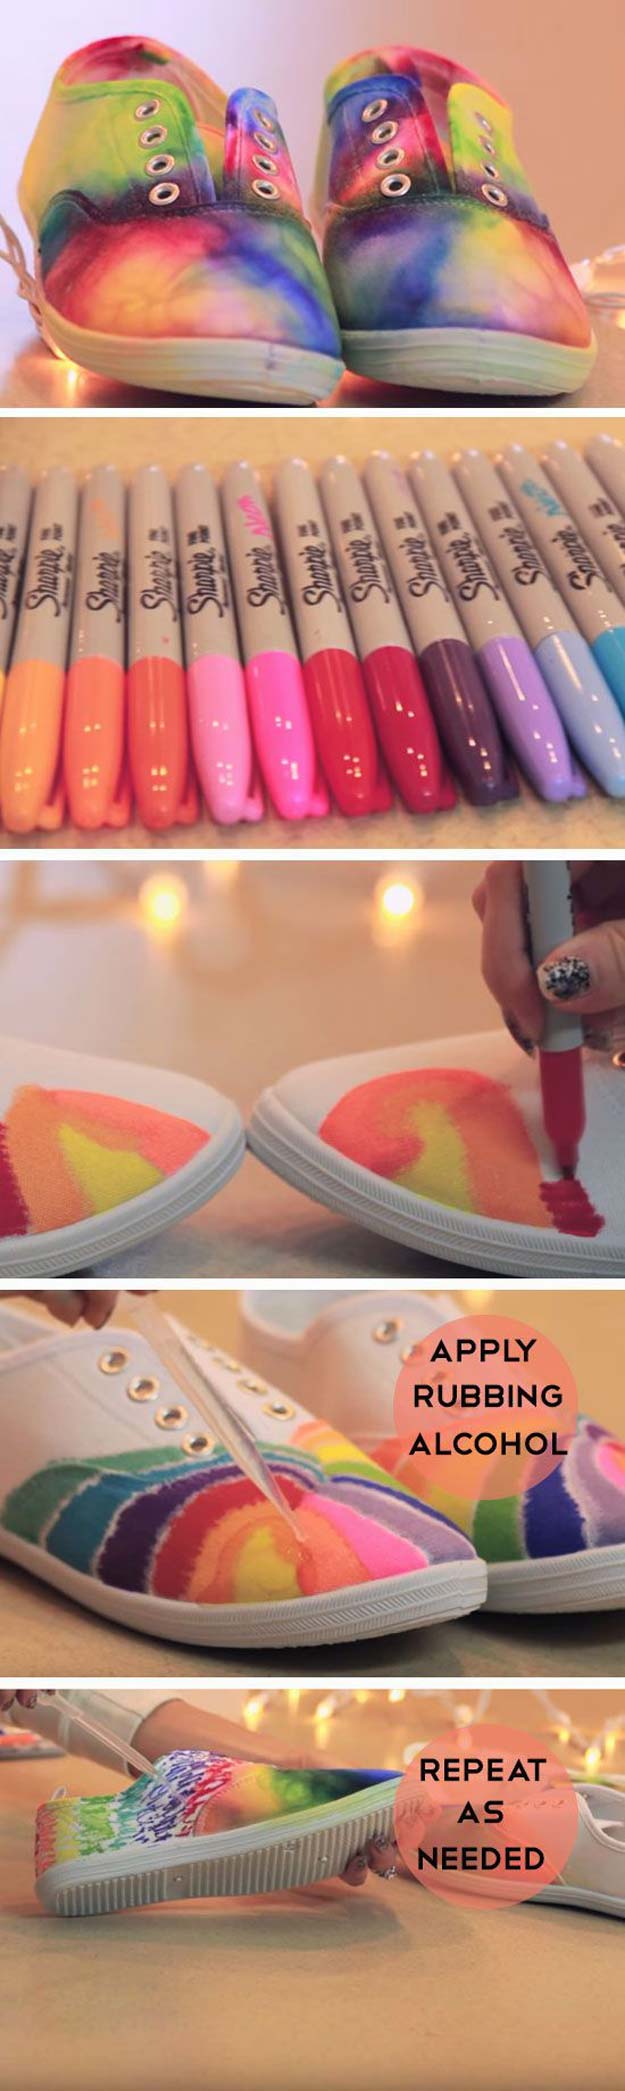 Best DIY Rainbow Crafts Ideas - Rainbow Shoes - Fun DIY Projects With Rainbows Make Cool Room and Wall Decor, Party and Gift Ideas, Clothes, Jewelry and Hair Accessories - Awesome Ideas and Step by Step Tutorials for Teens and Adults, Girls and Tweens 